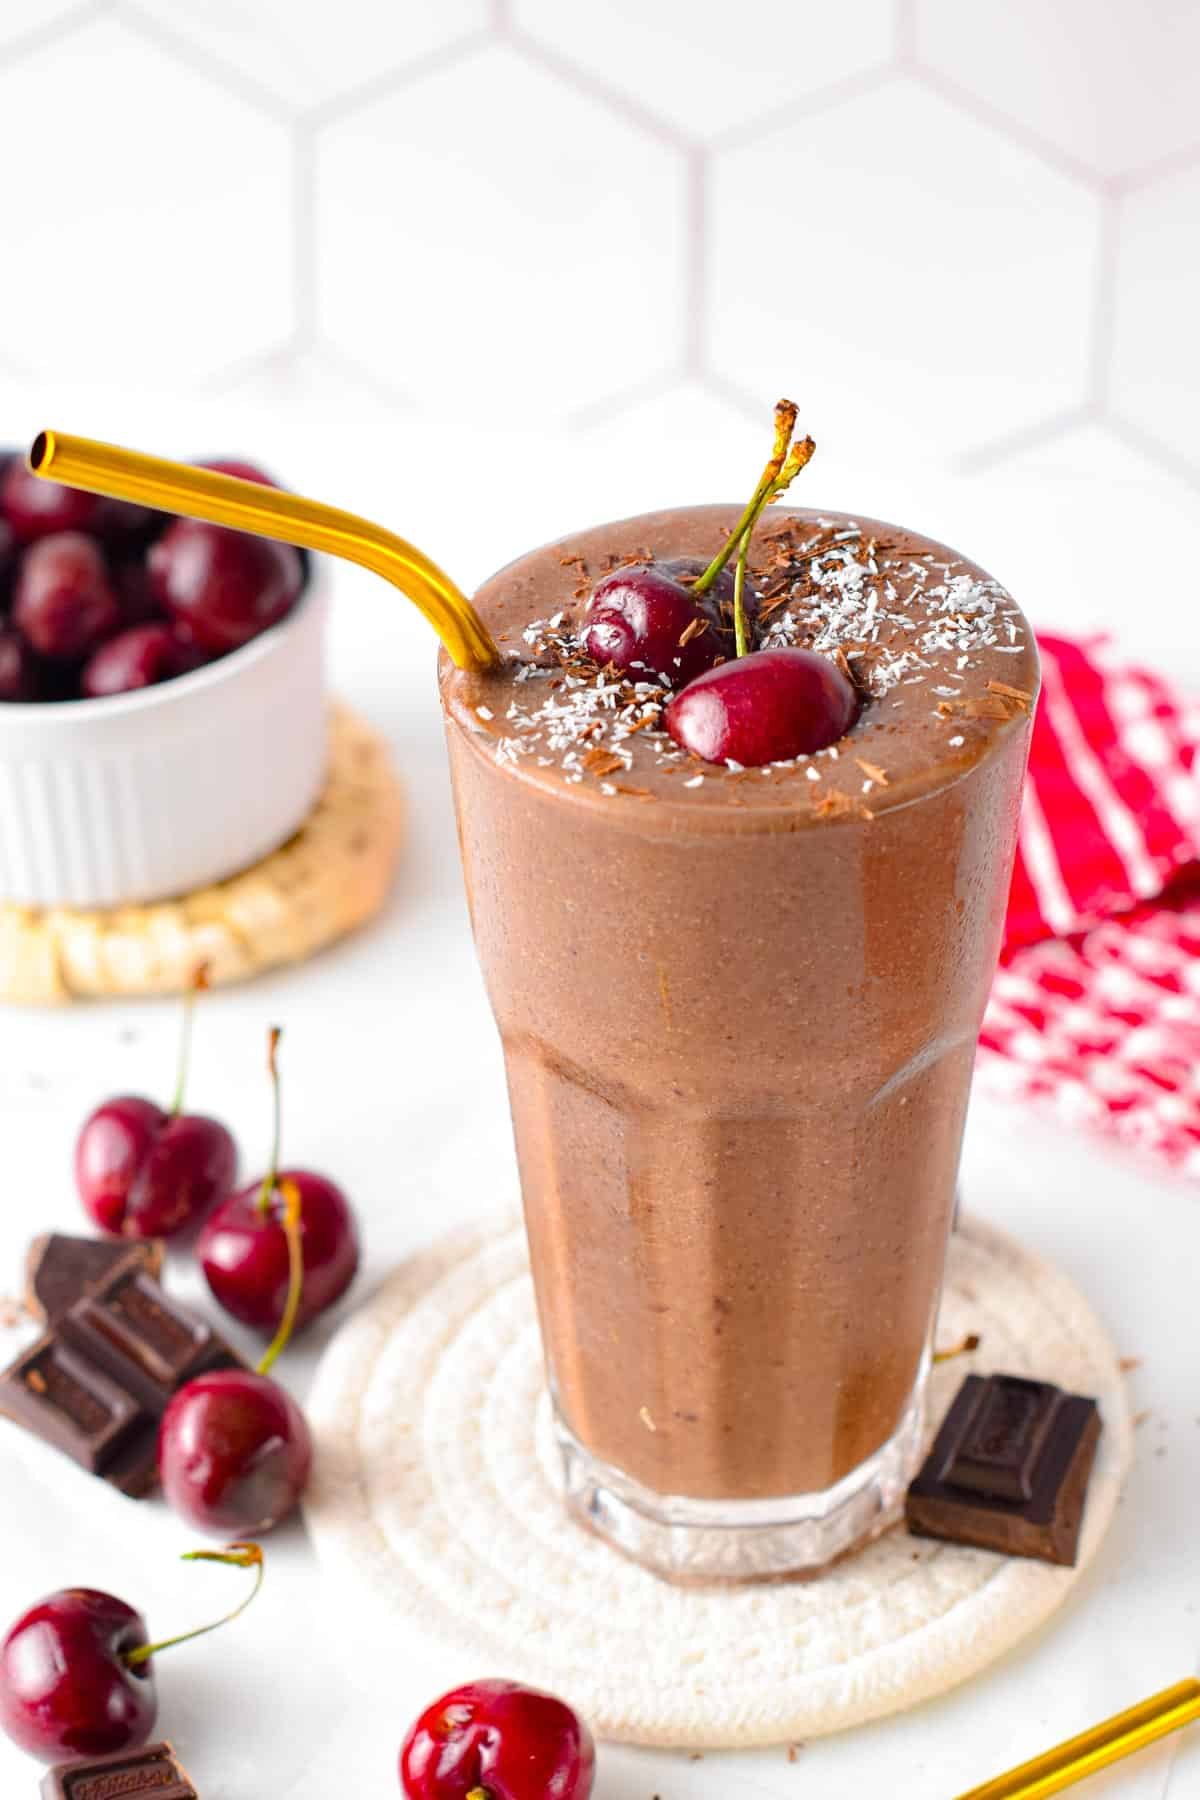 This Chocolate Cherry Smoothie is a thick and creamy chocolate smoothie packed with cherries. It has the most delicious chocolate cherry flavors, like a black forest dessert but in healthy drinks packed with spinach and chia seeds to energize you.